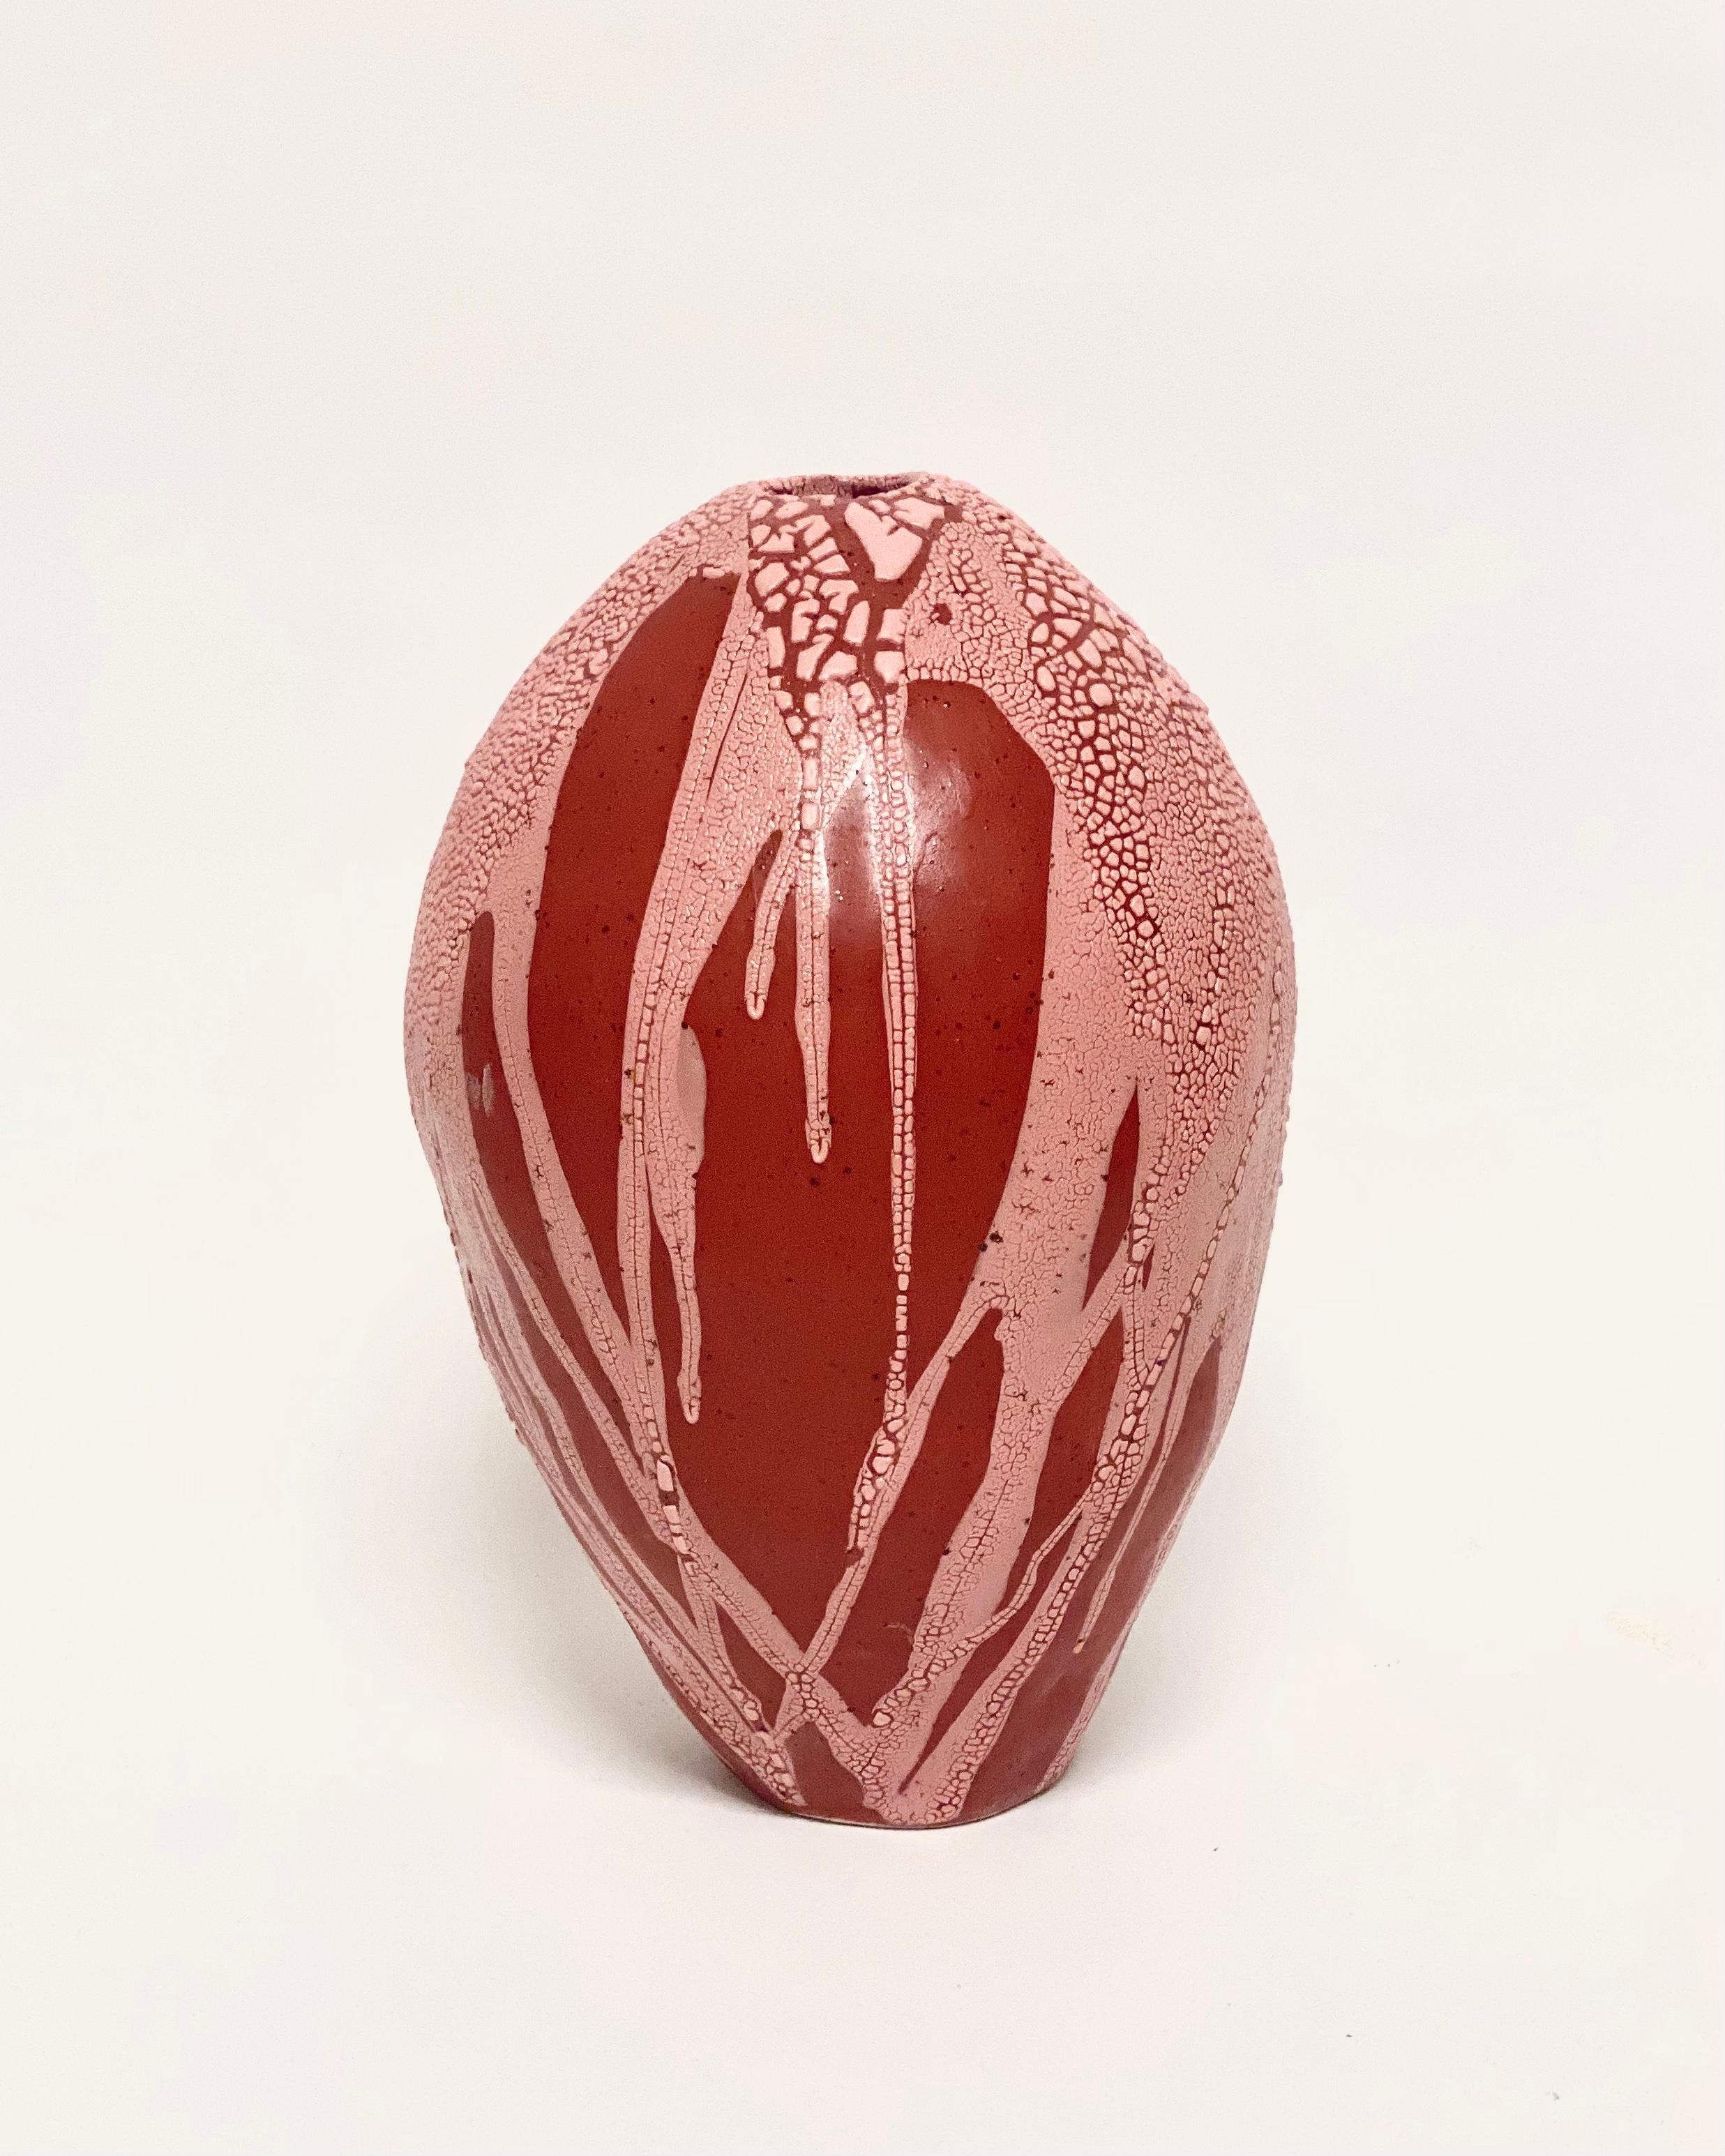 Red/pink dragon egg vase by Astrid Öhman
Handmade
Dimensions: D 19 x H 31 cm
Materials: Ceramic, stoneware hand modeled, glazed, and fired at high temperature.

Ceramics by Astrid Öhman. Each piece is handmade and unique. All pieces can be made